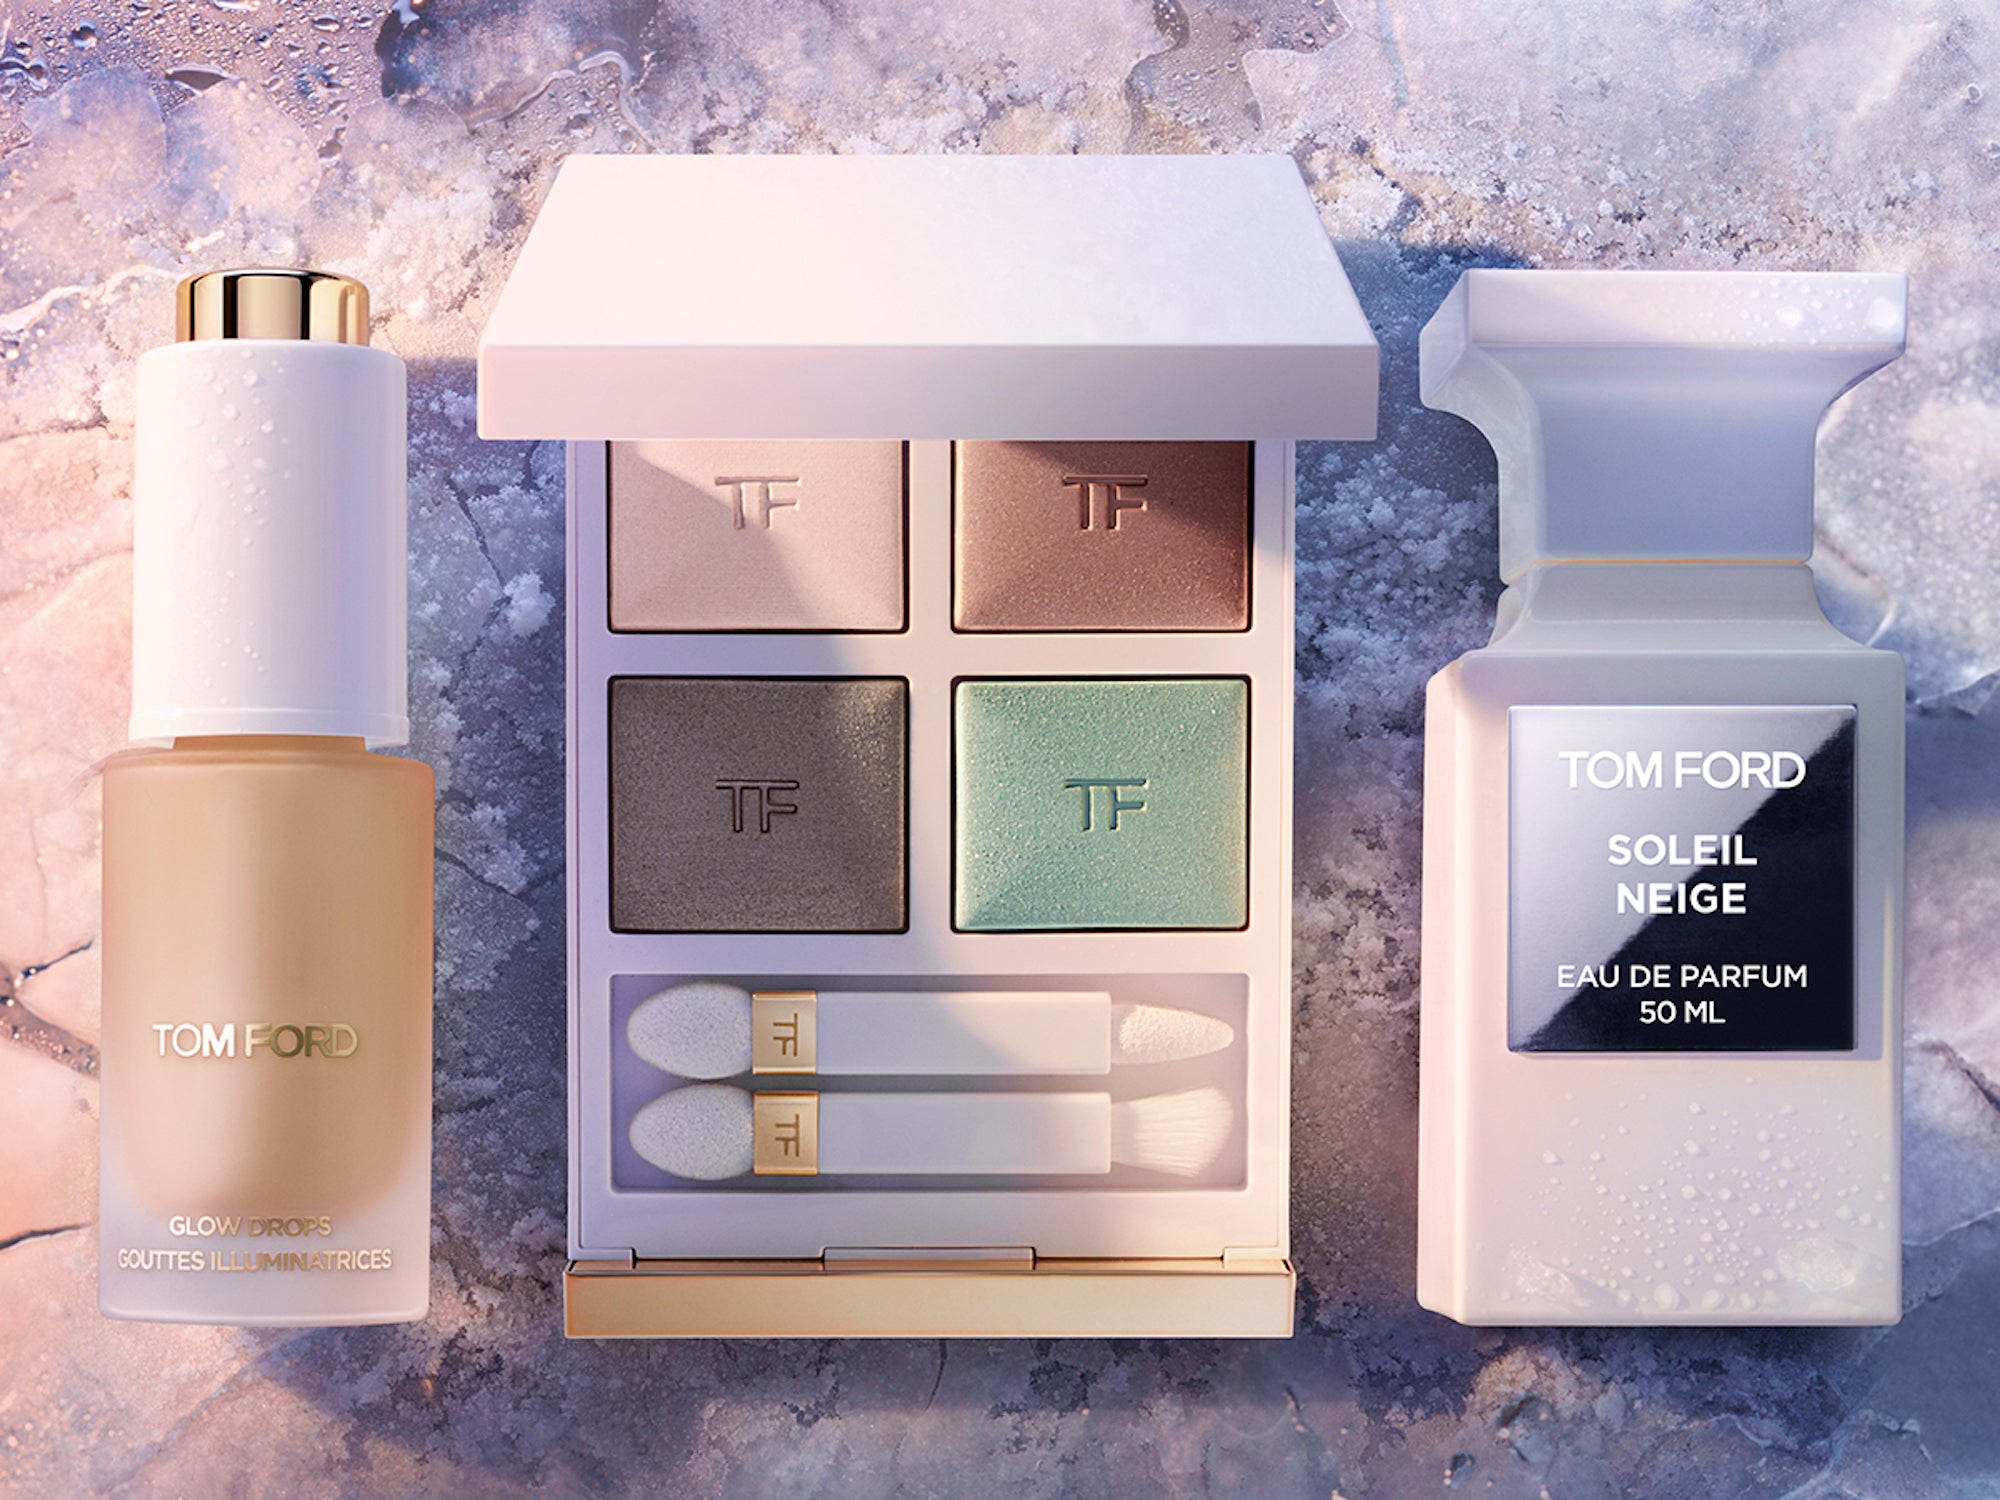 Tom Ford Beauty Launches Soleil Neige Collection